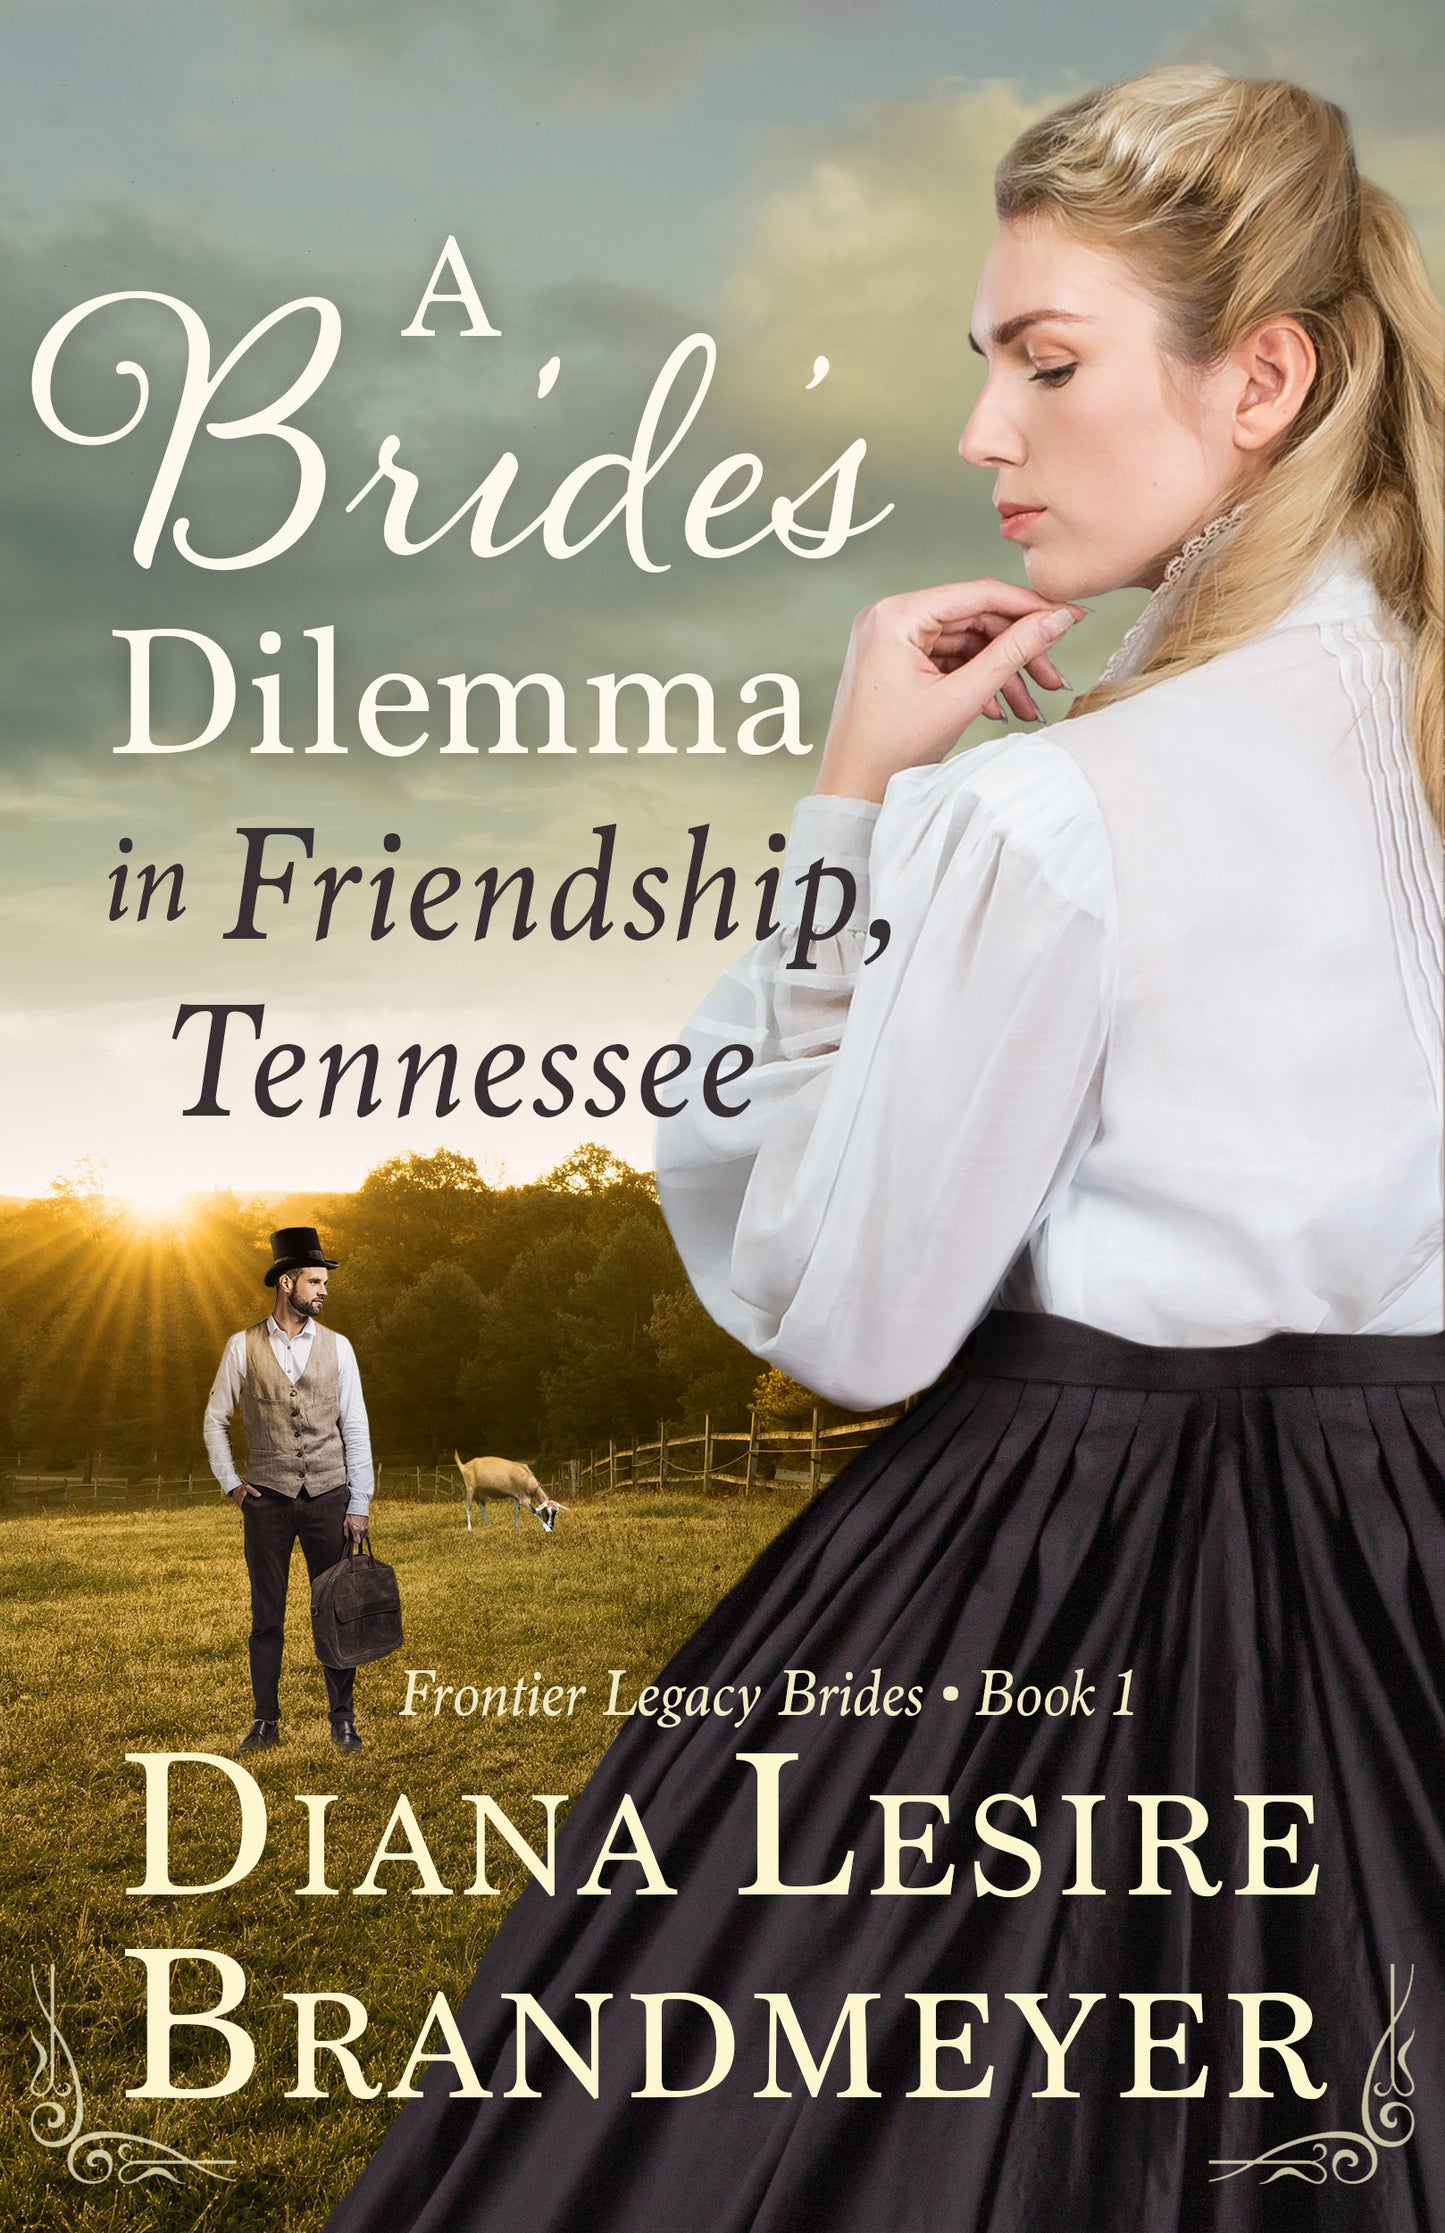 Gift of A Bride's Dilemma in Friendship, Tennessee